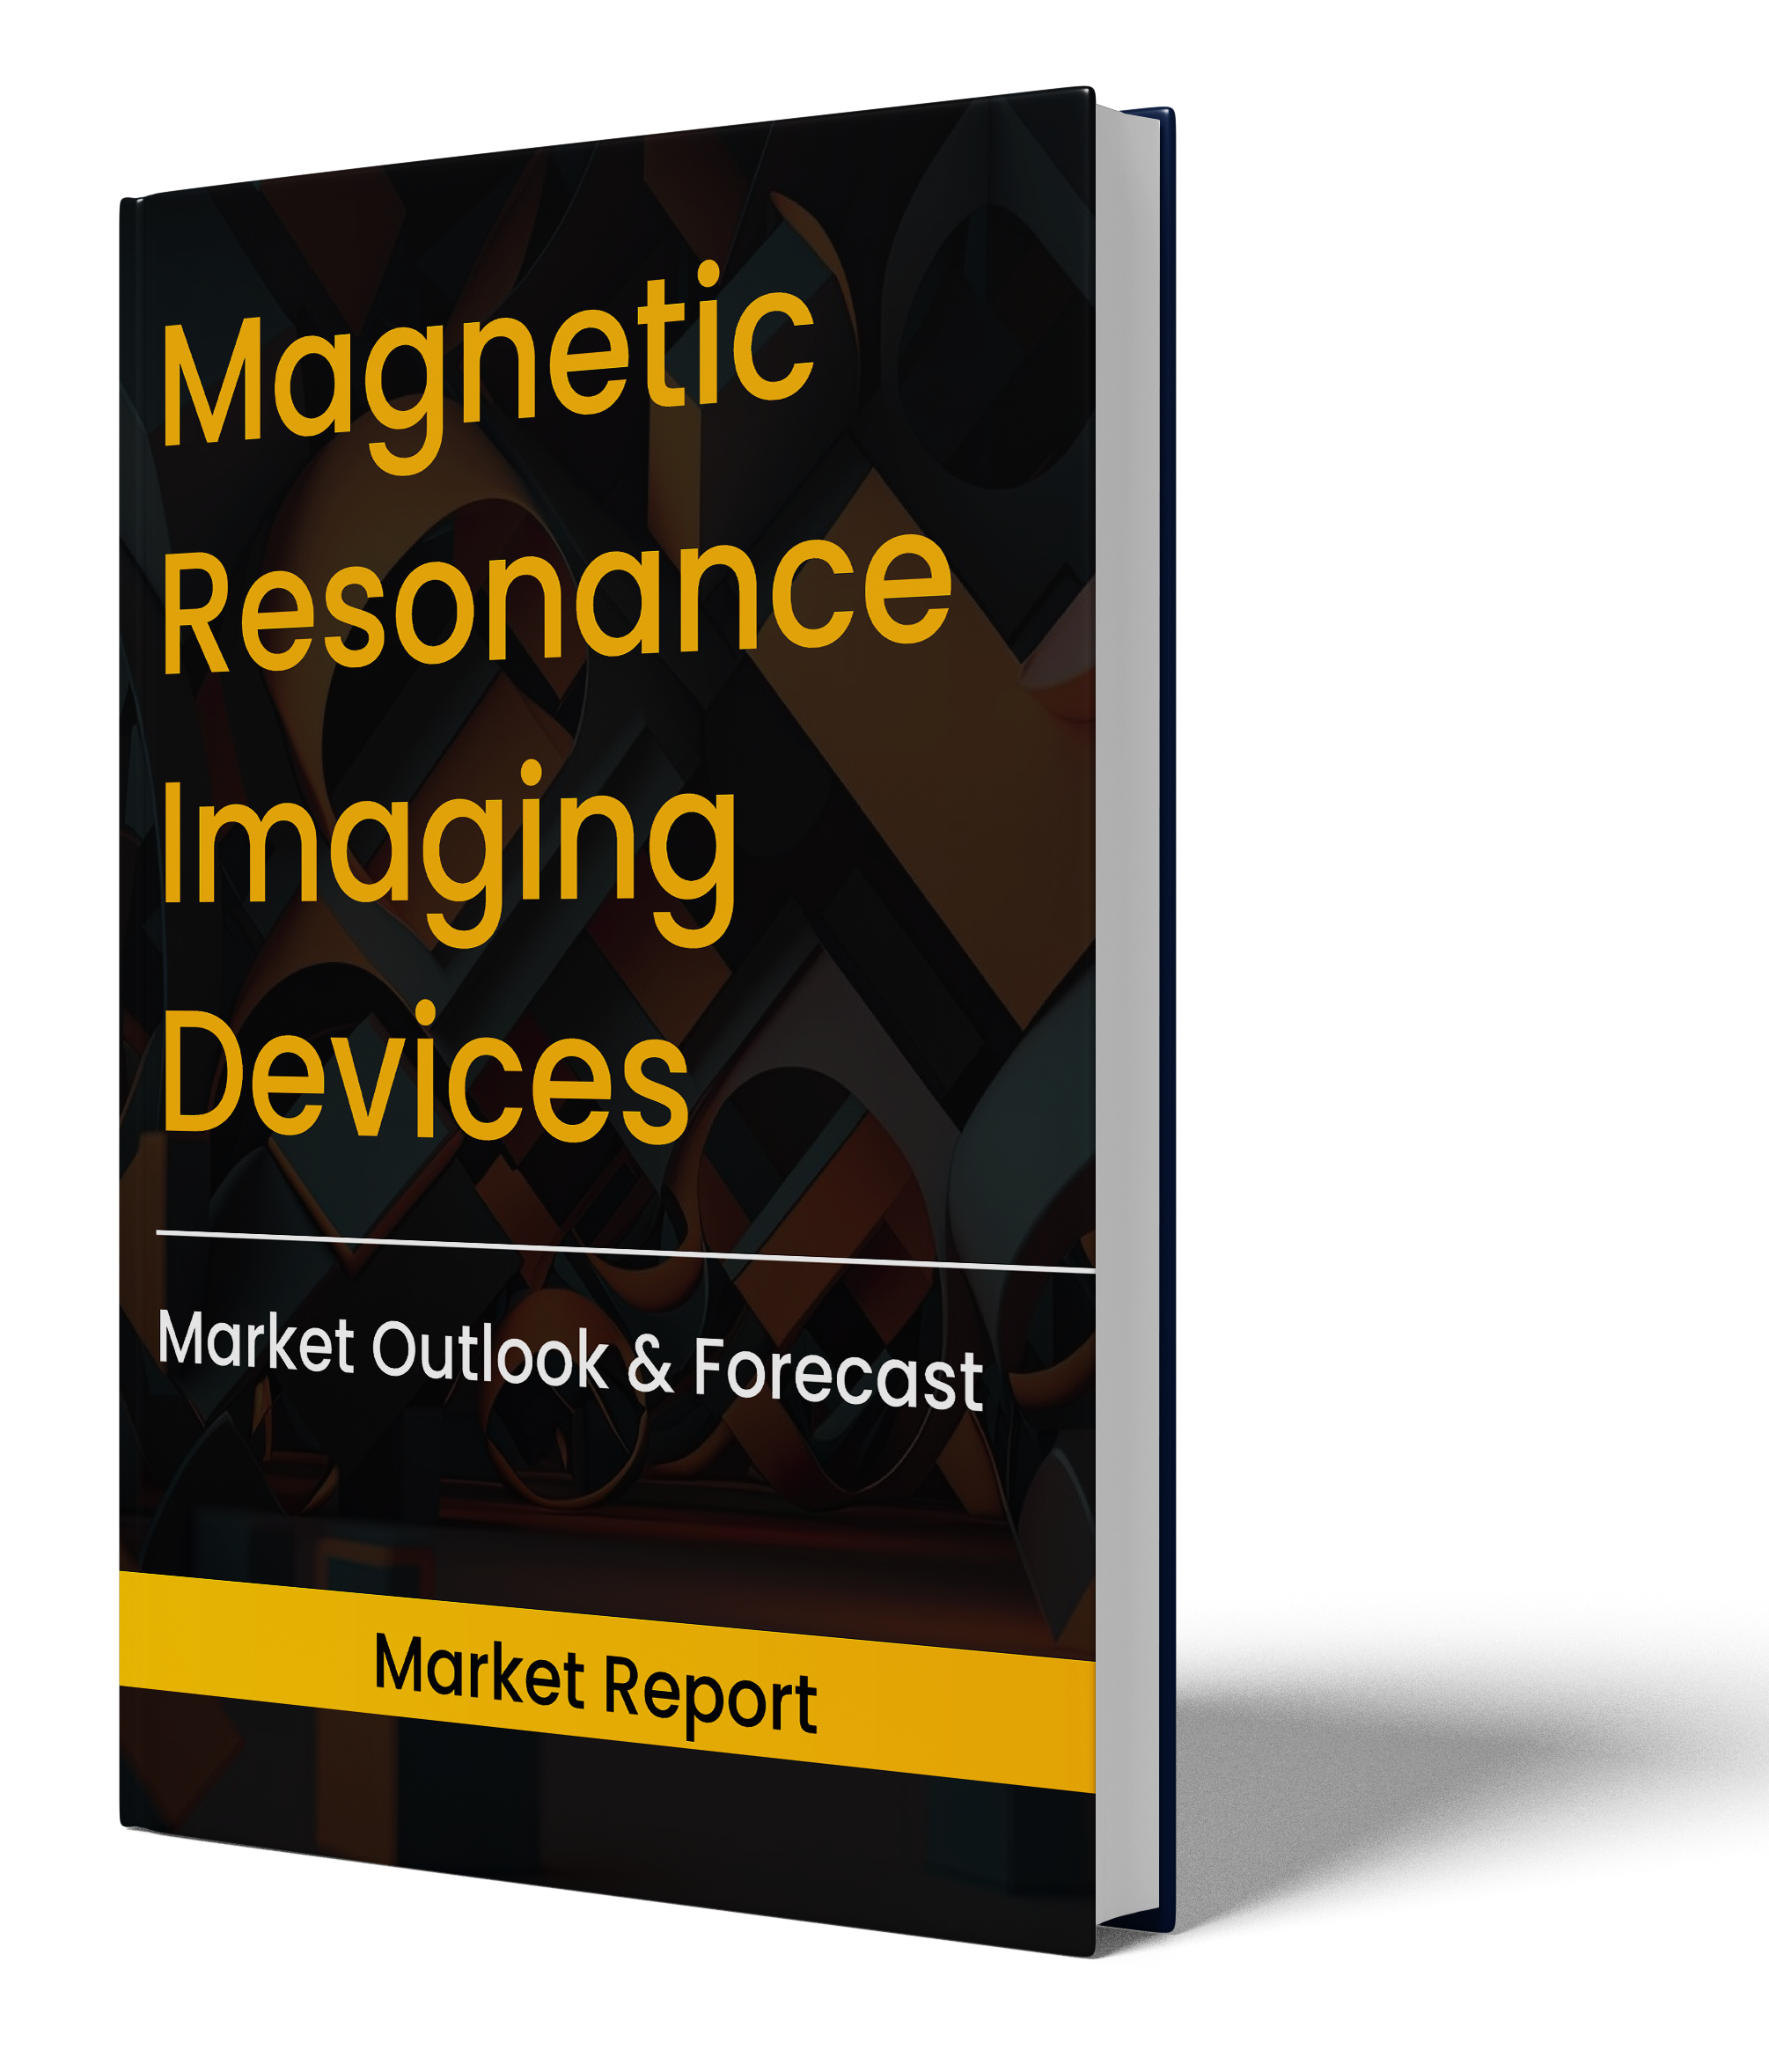 Magnetic Resonance Imaging Devices Market Report